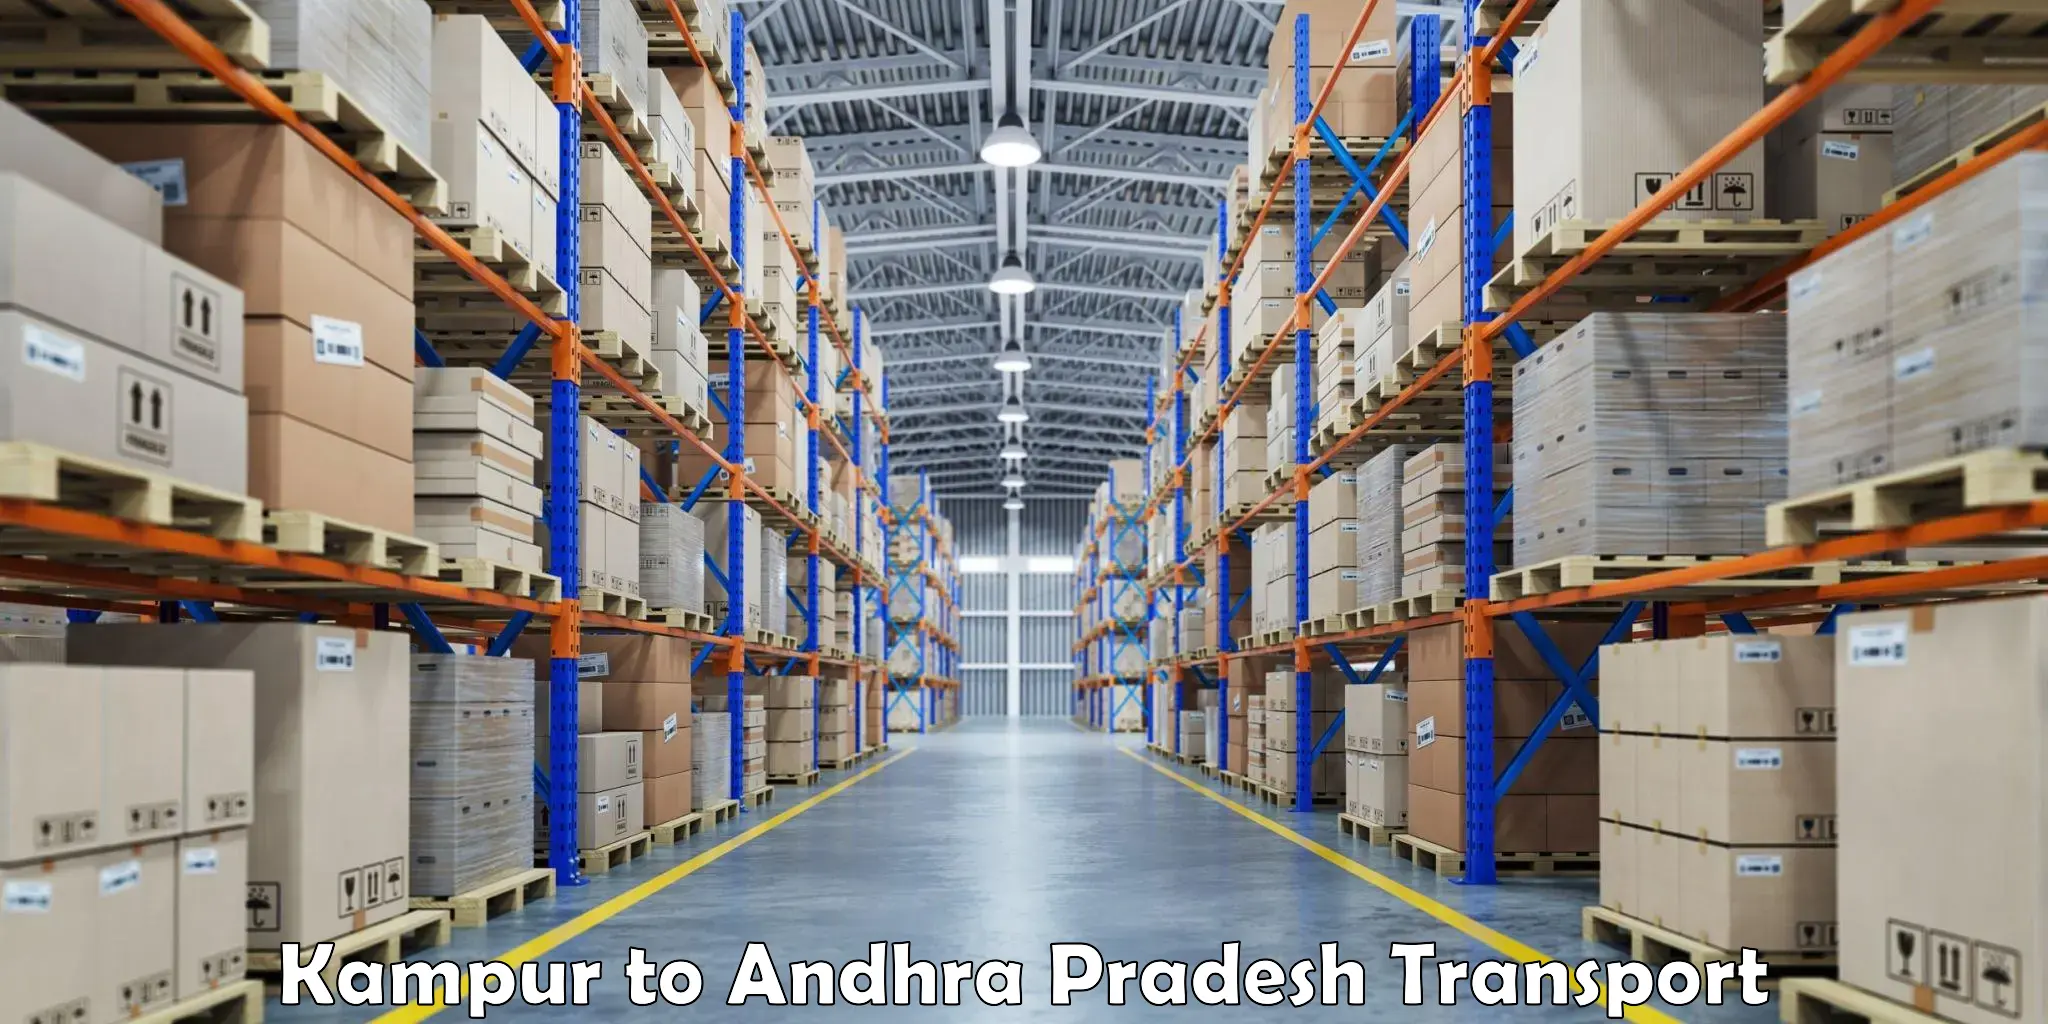 Part load transport service in India Kampur to Kadapa